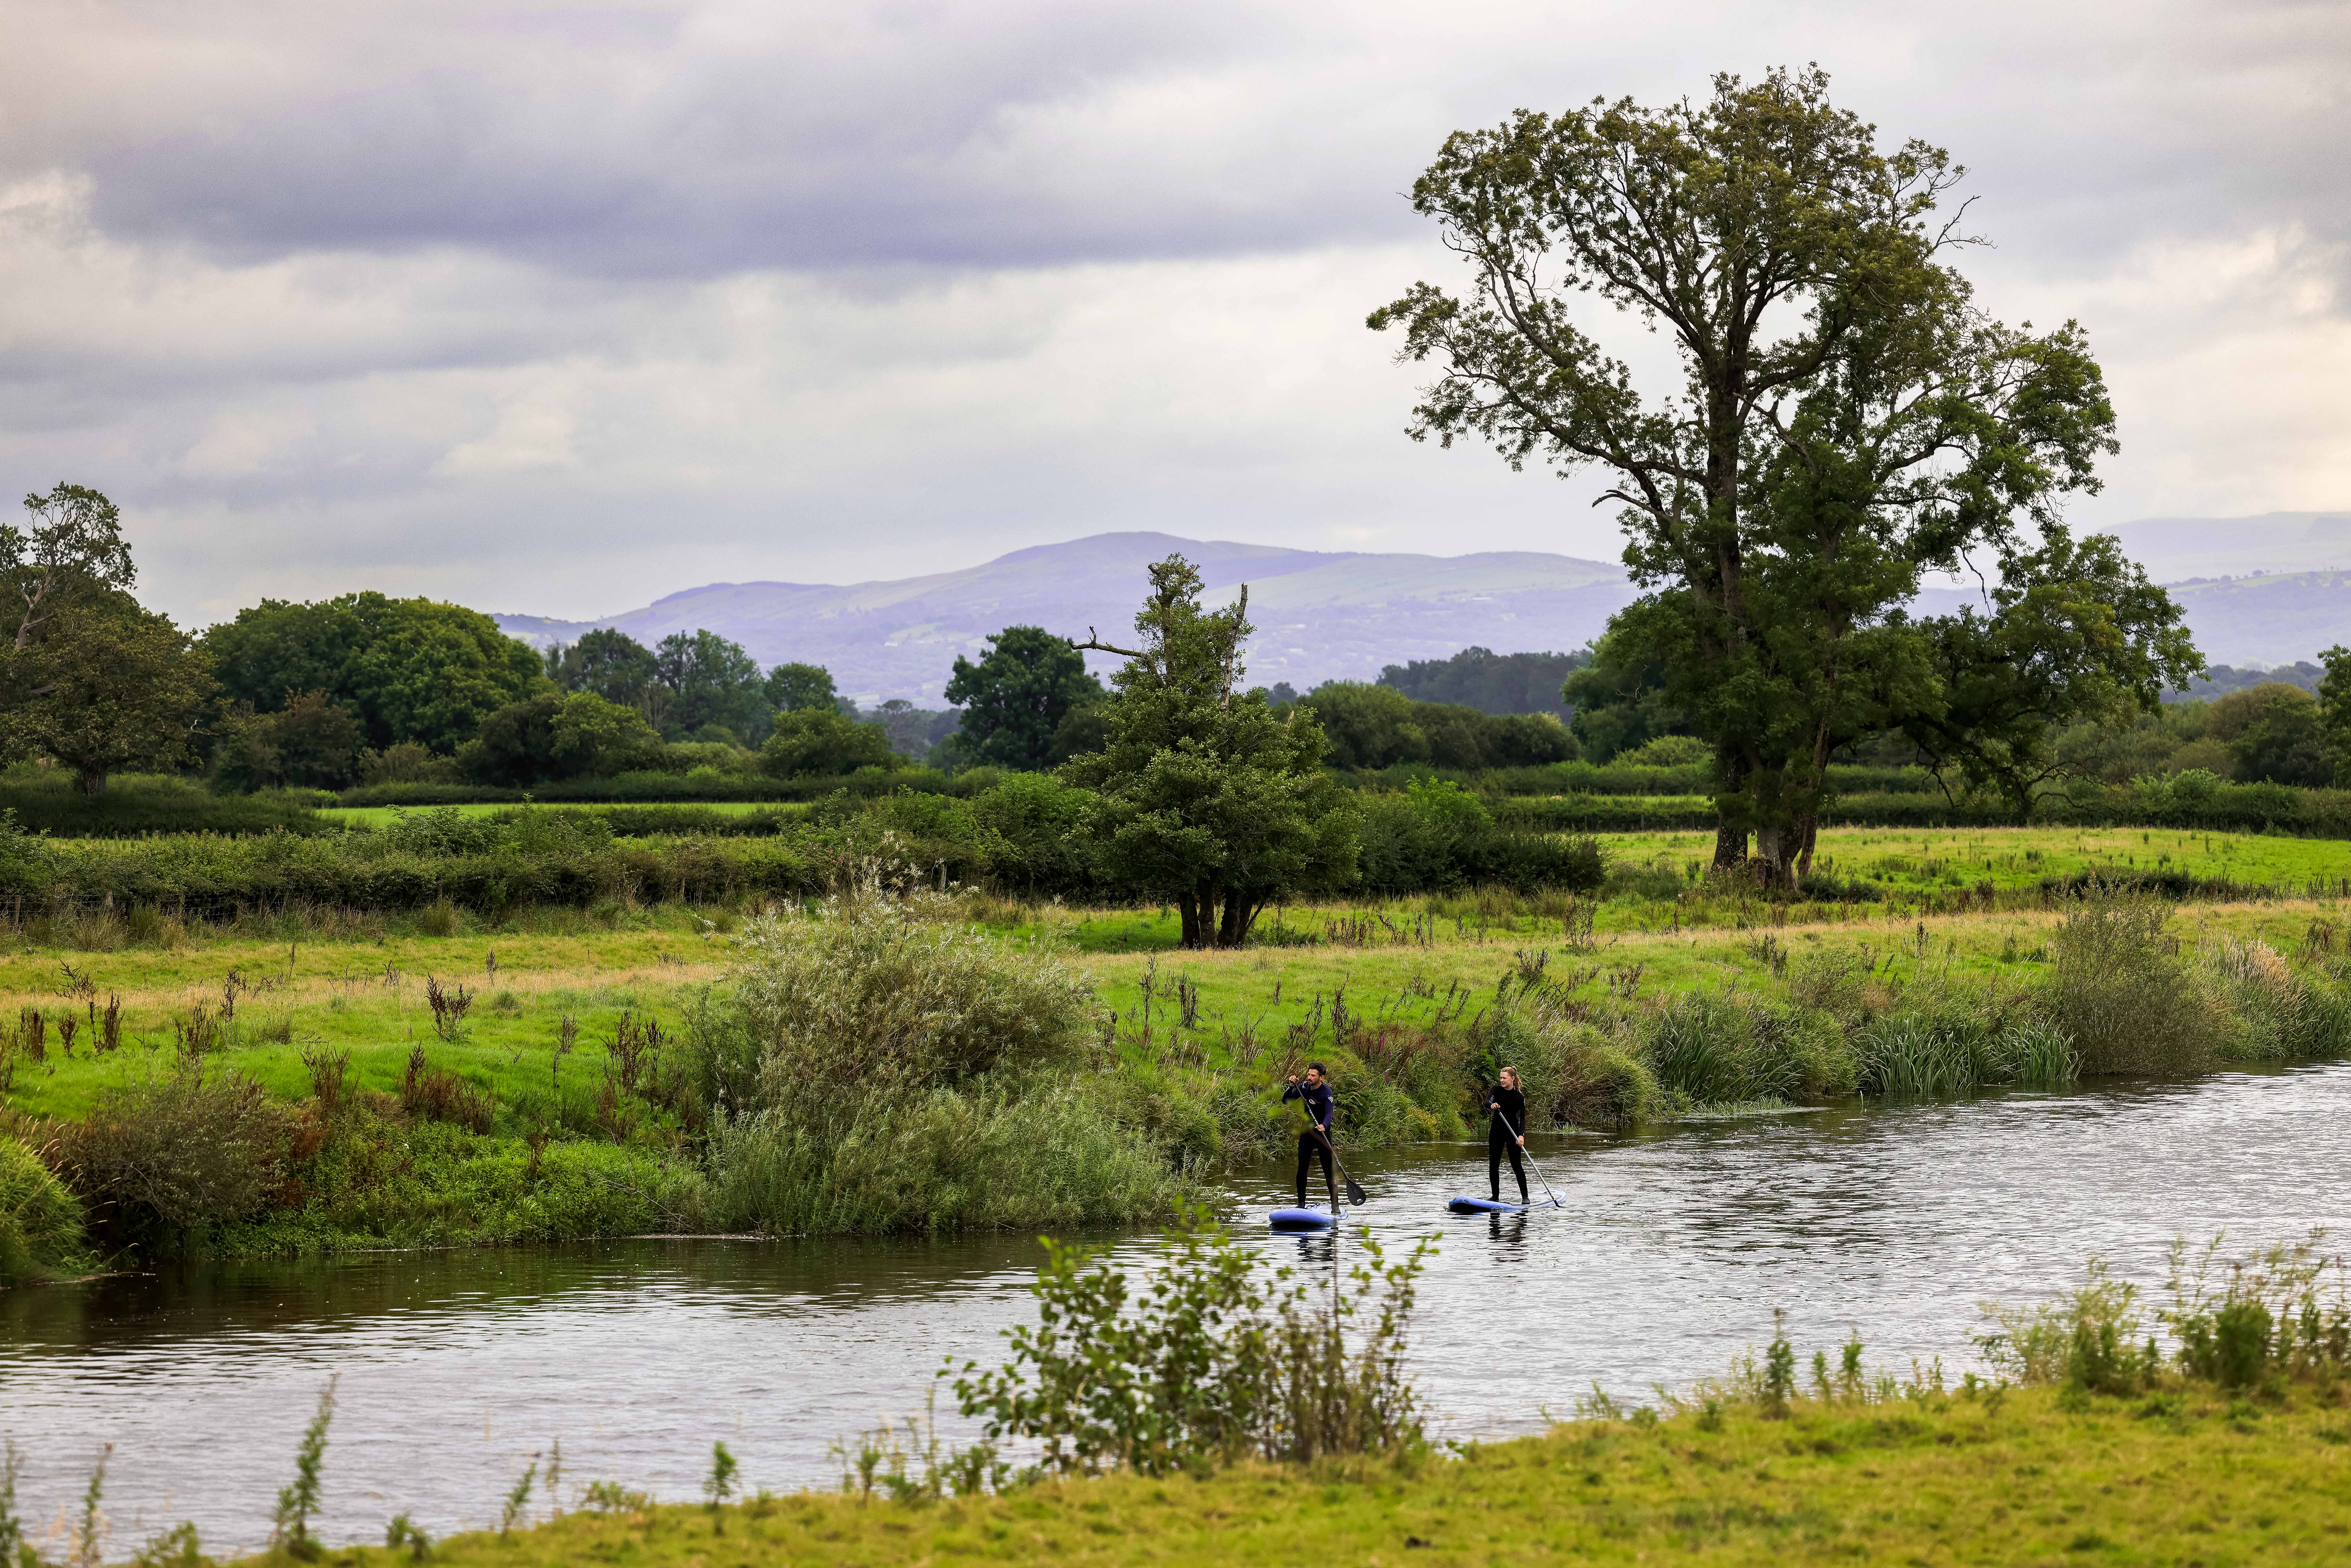 The Tywi, the longest river in Wales